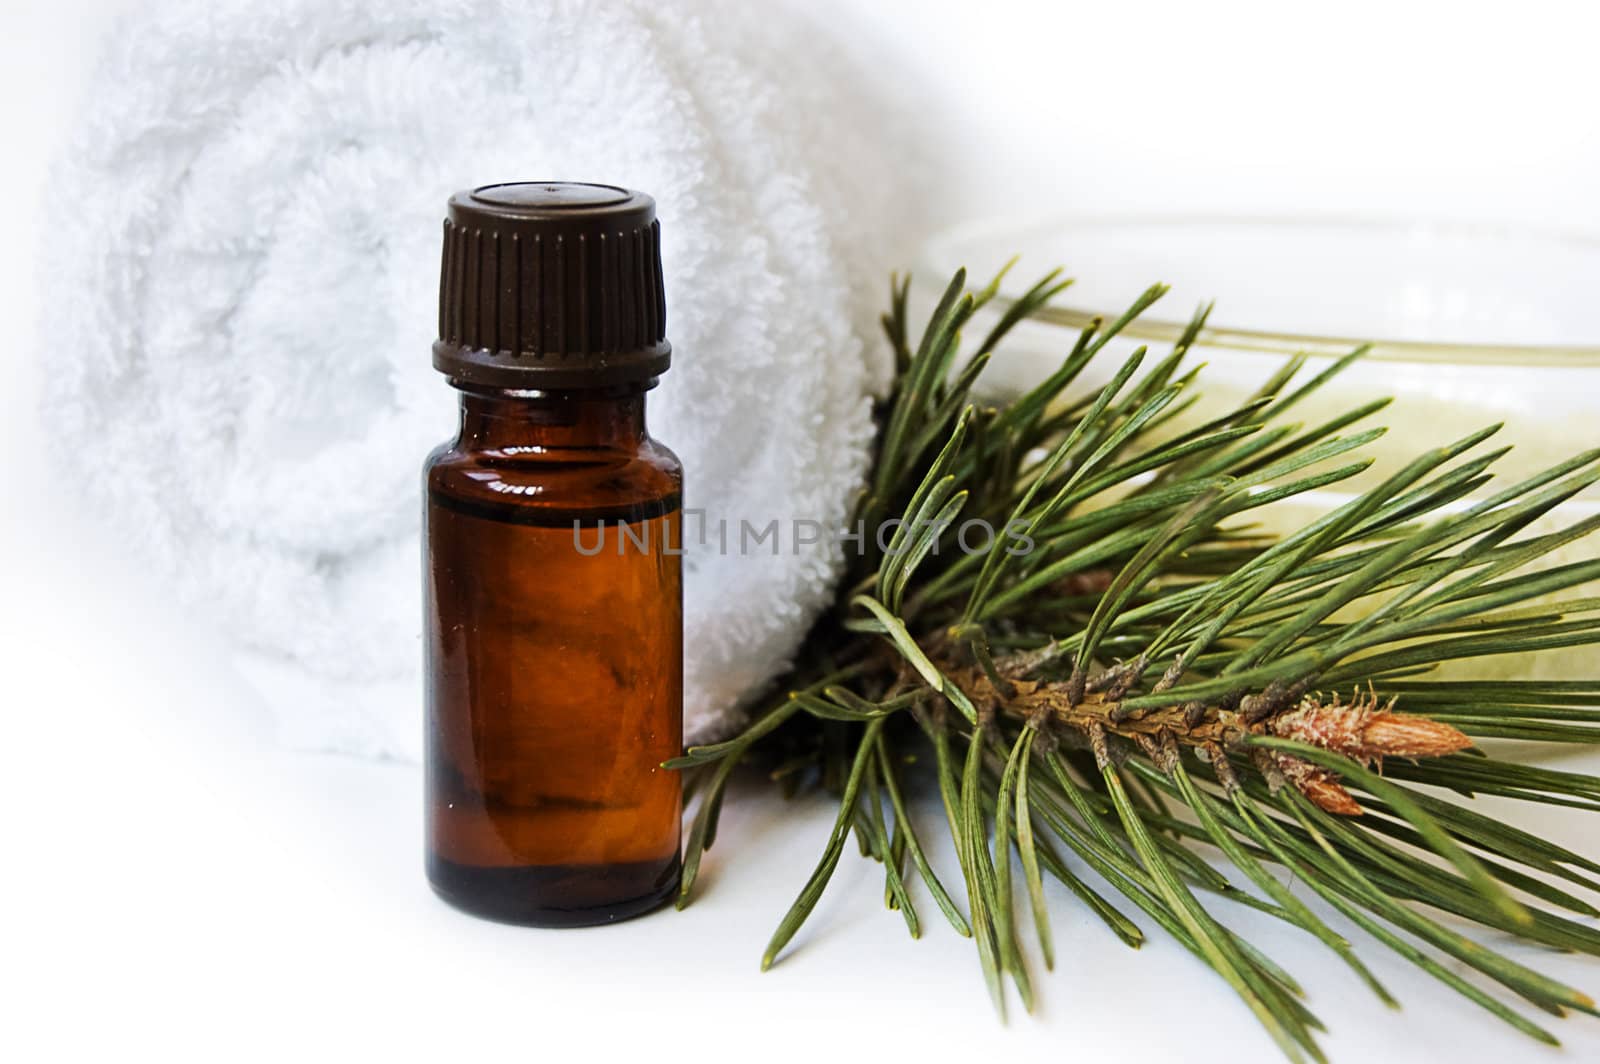 Bottle of fir tree oil and towel by Angel_a